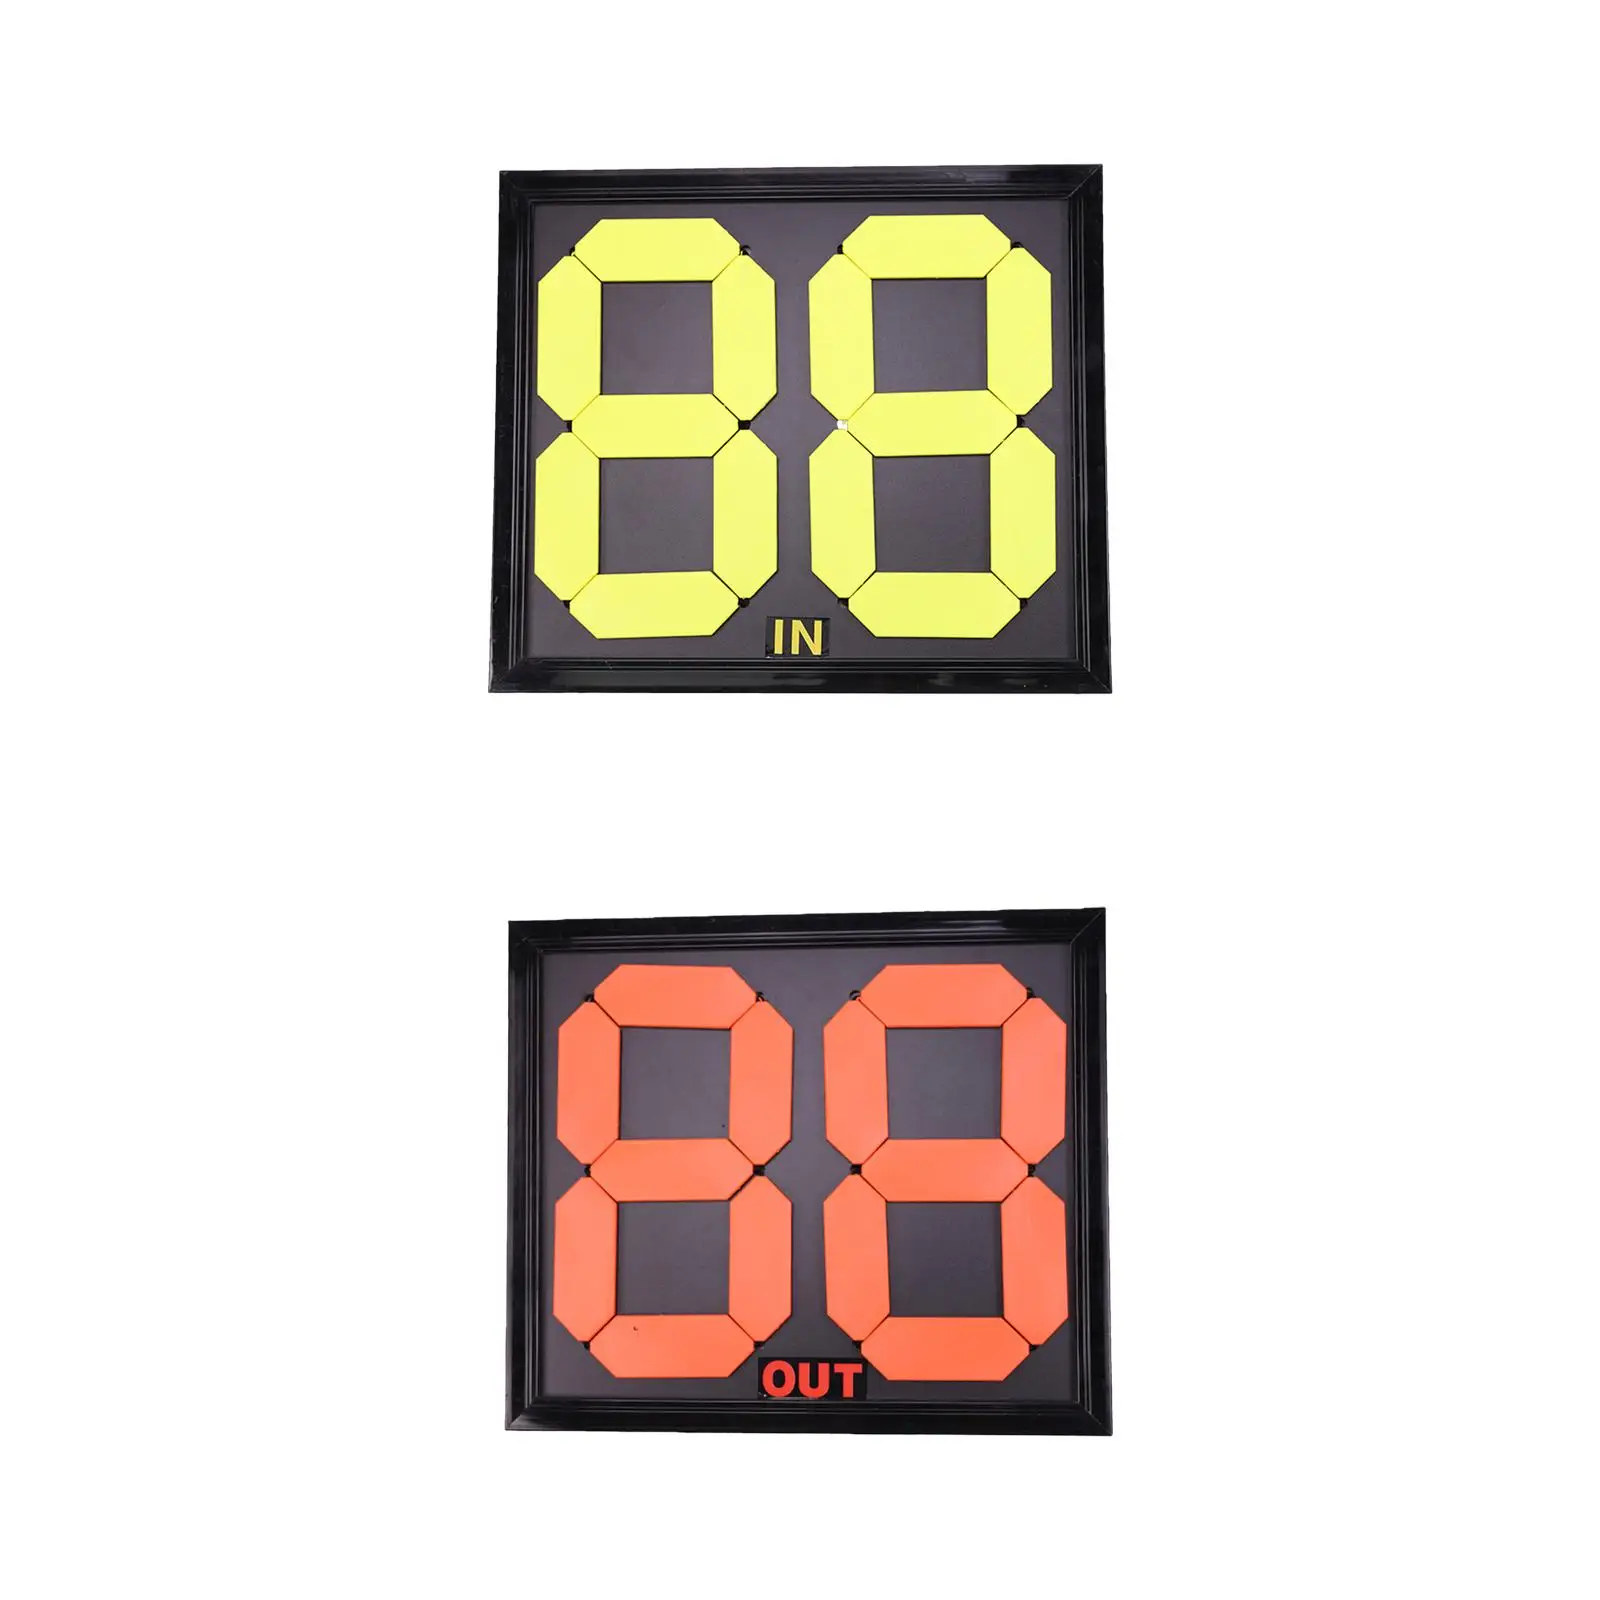 2x Two Digit Numbers Soccer Football Substitution Board Manual Flip Bright Color